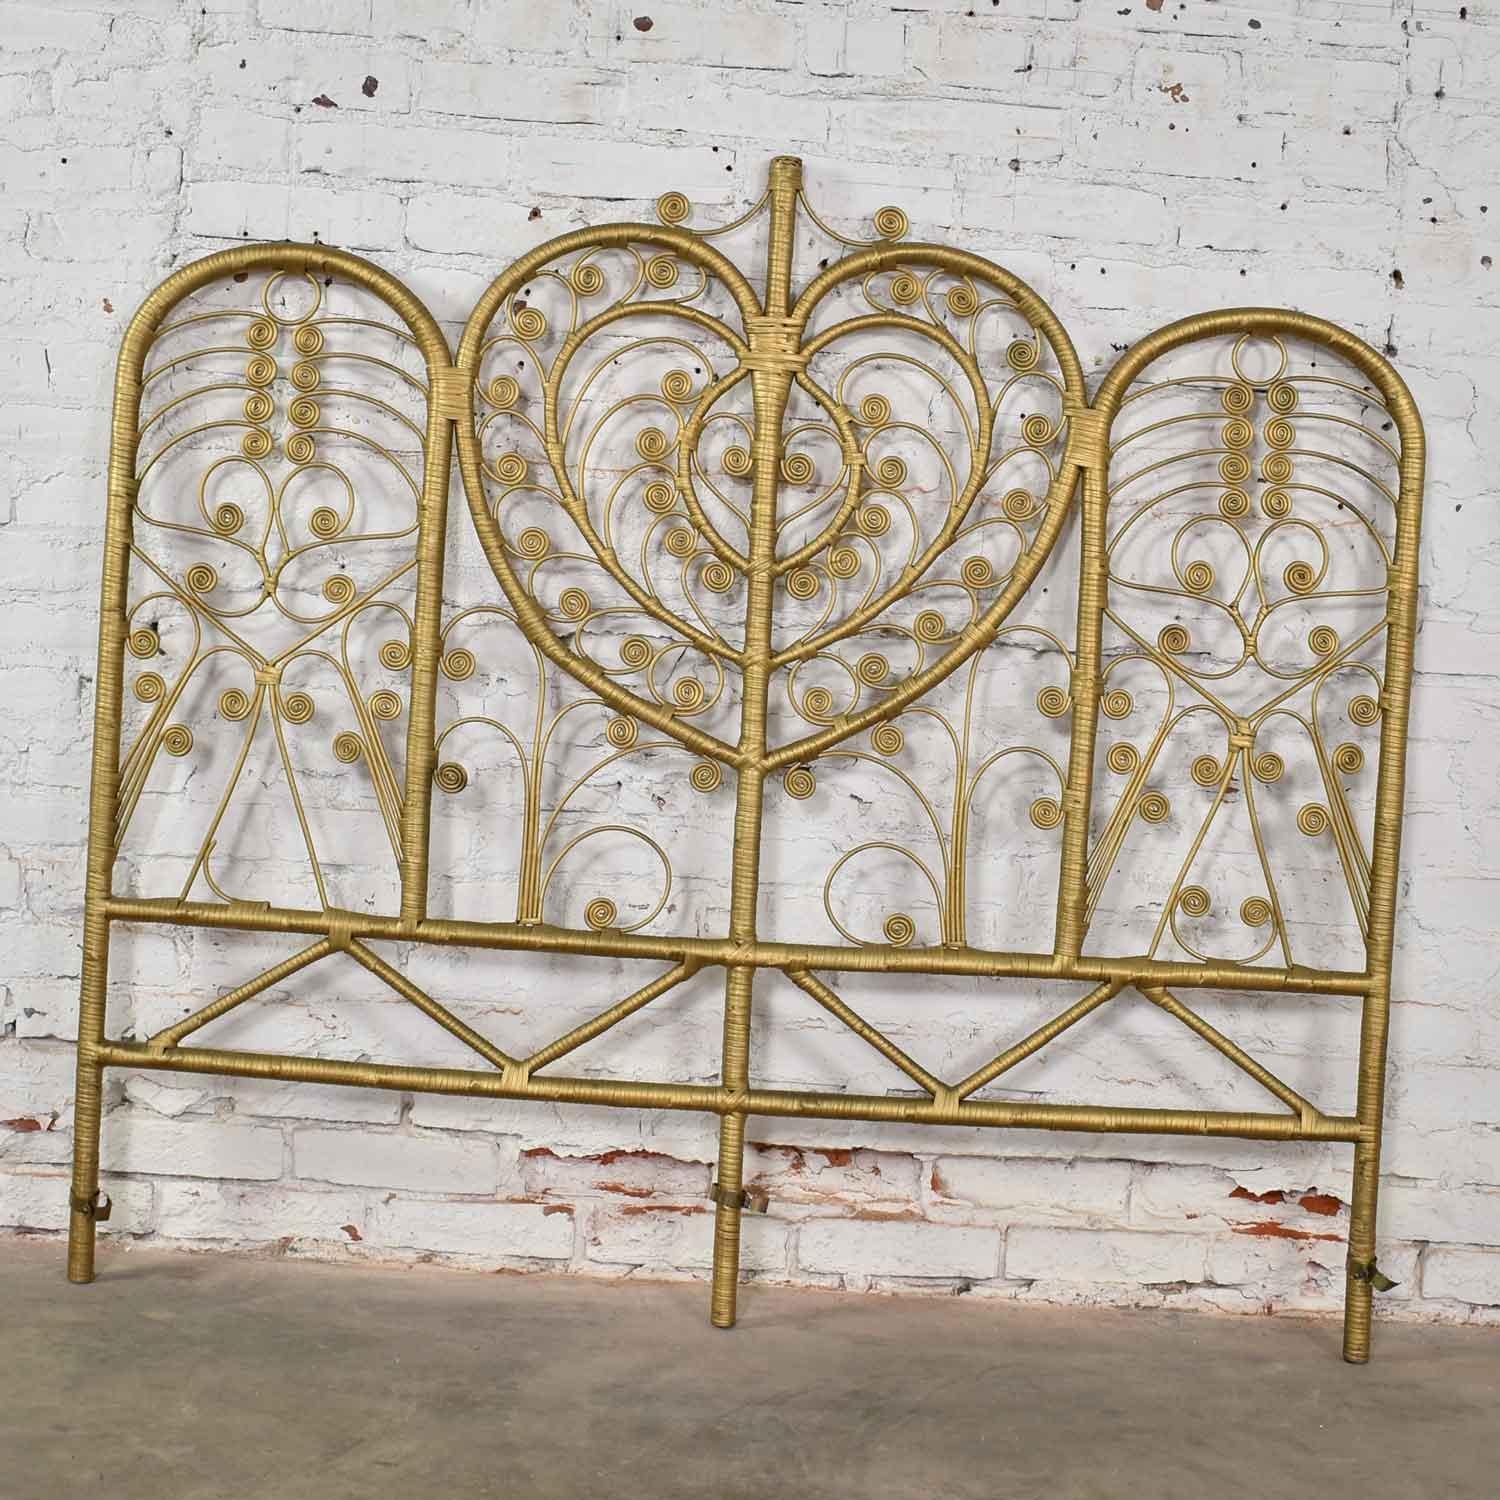 Hollywood Regency Bohemian Bedroom Trio Gold Wicker Headboard Chair and Mirror In Good Condition For Sale In Topeka, KS